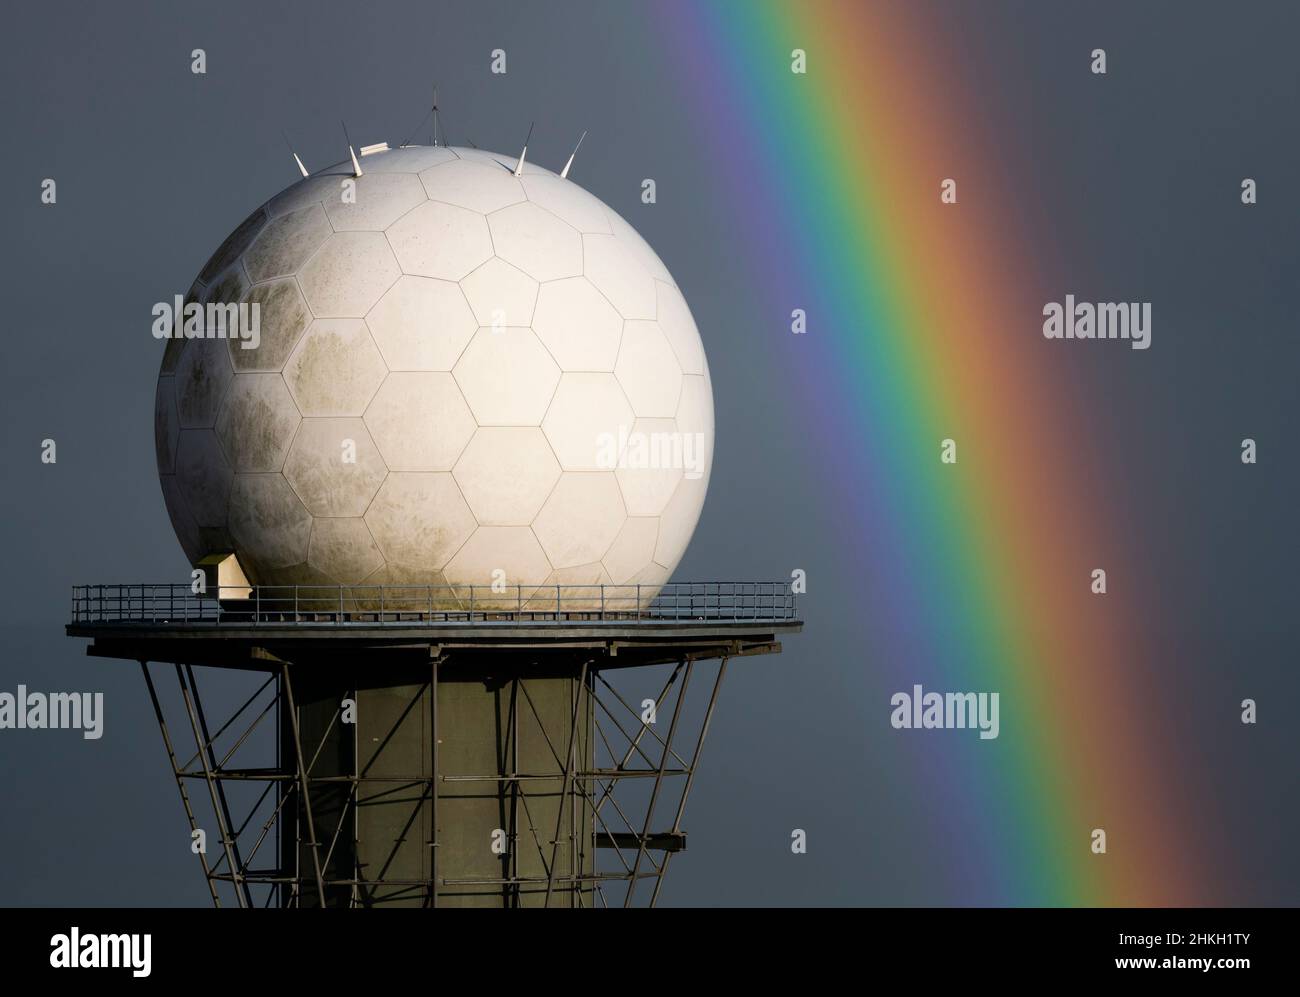 A radar dome on Titterstone Clee hill, Shropshire. Stock Photo